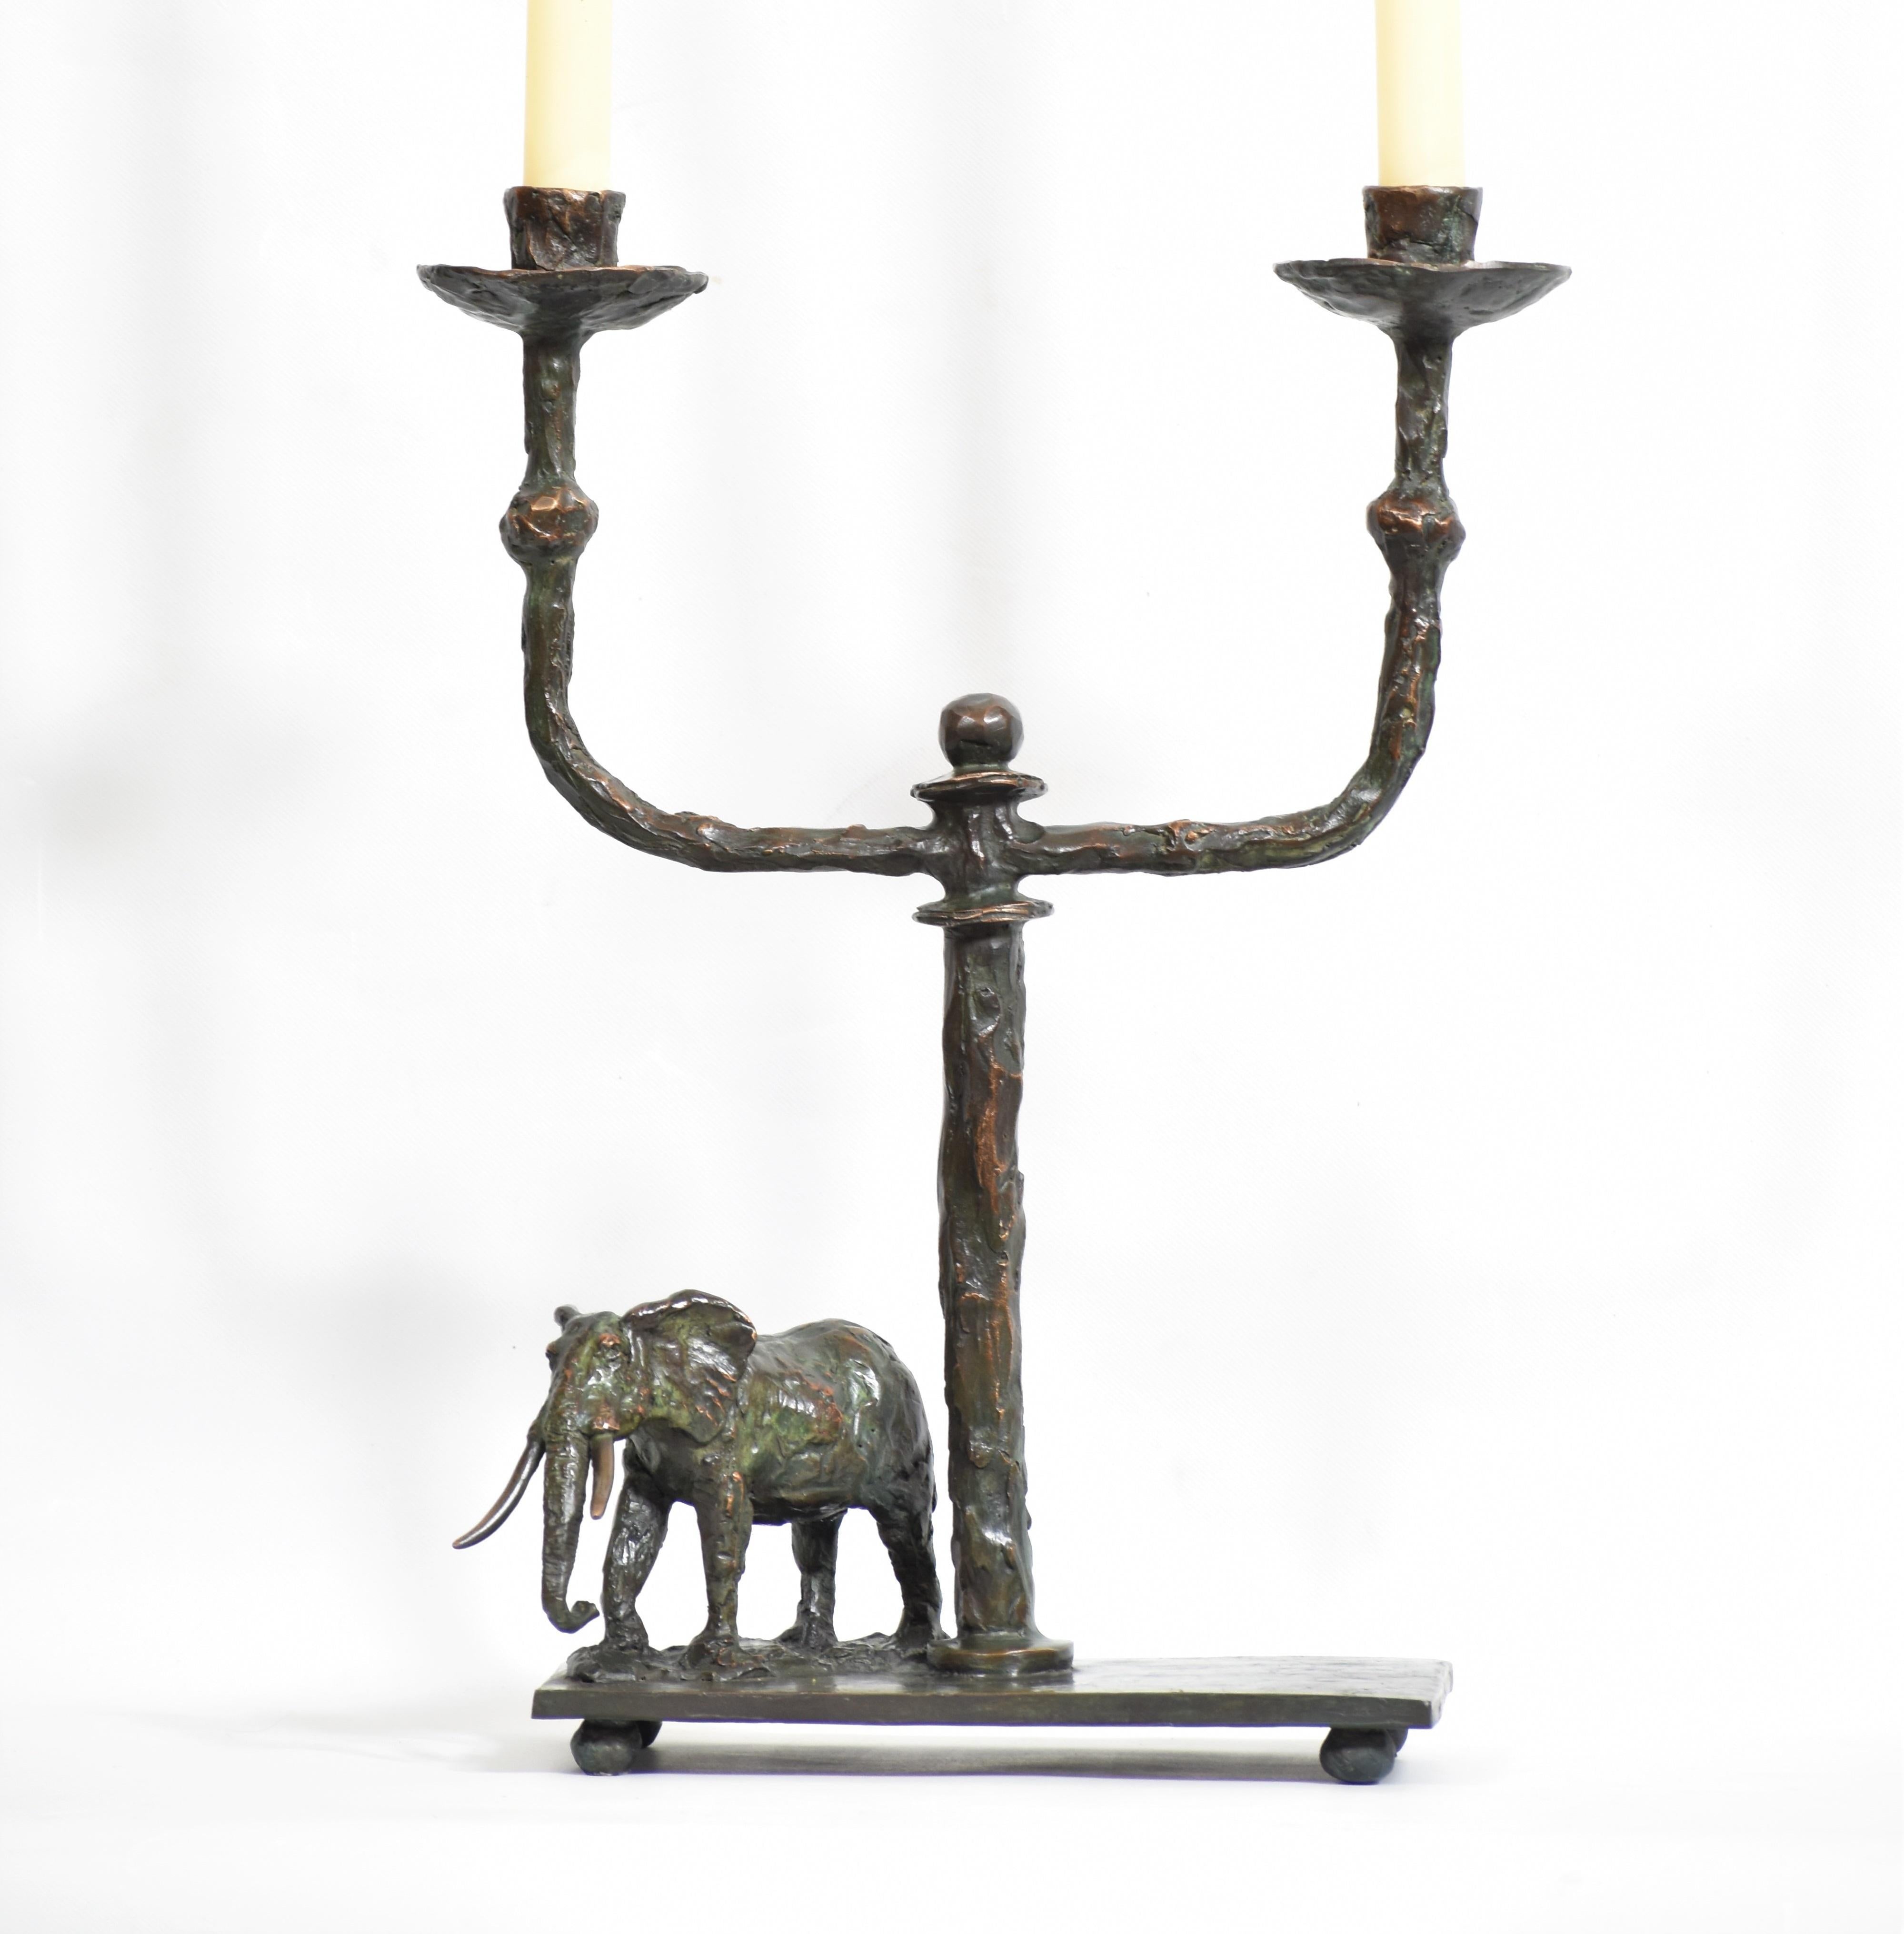 Elephant Candlestick in cast bronze
Combining art and functionality this is a candelabra featuring a bronze sculpture of Africa's iconic wildlife - an elephant bull. In Brown black patina with a hint of Verdigris. Each piece is sculpted, cast,